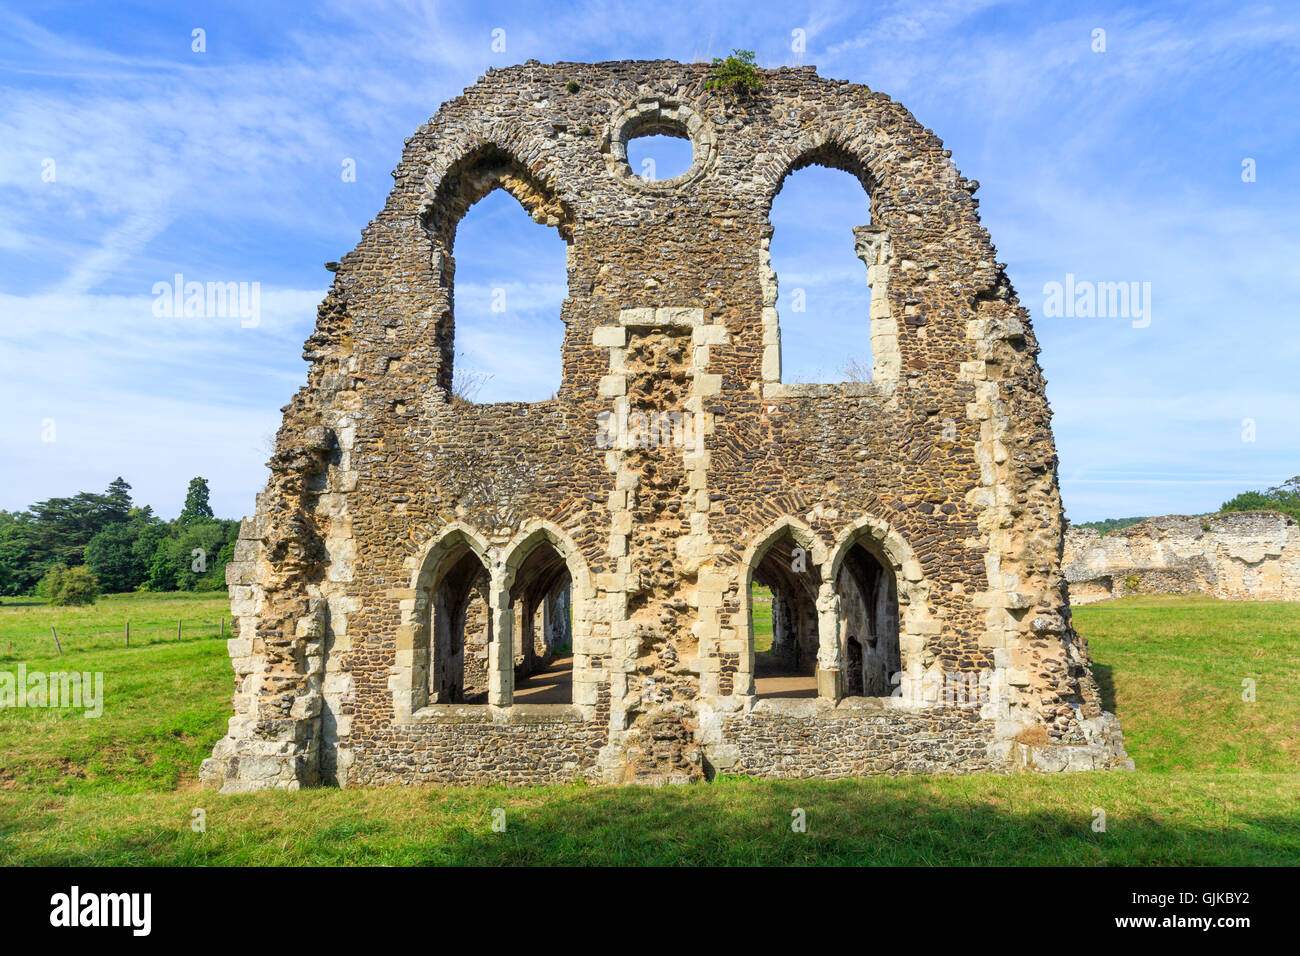 Ruins of Waverley Abbey, founded in 1128, the first Cistercian abbey in England, a Scheduled Ancient Monument, near Farnham Stock Photo